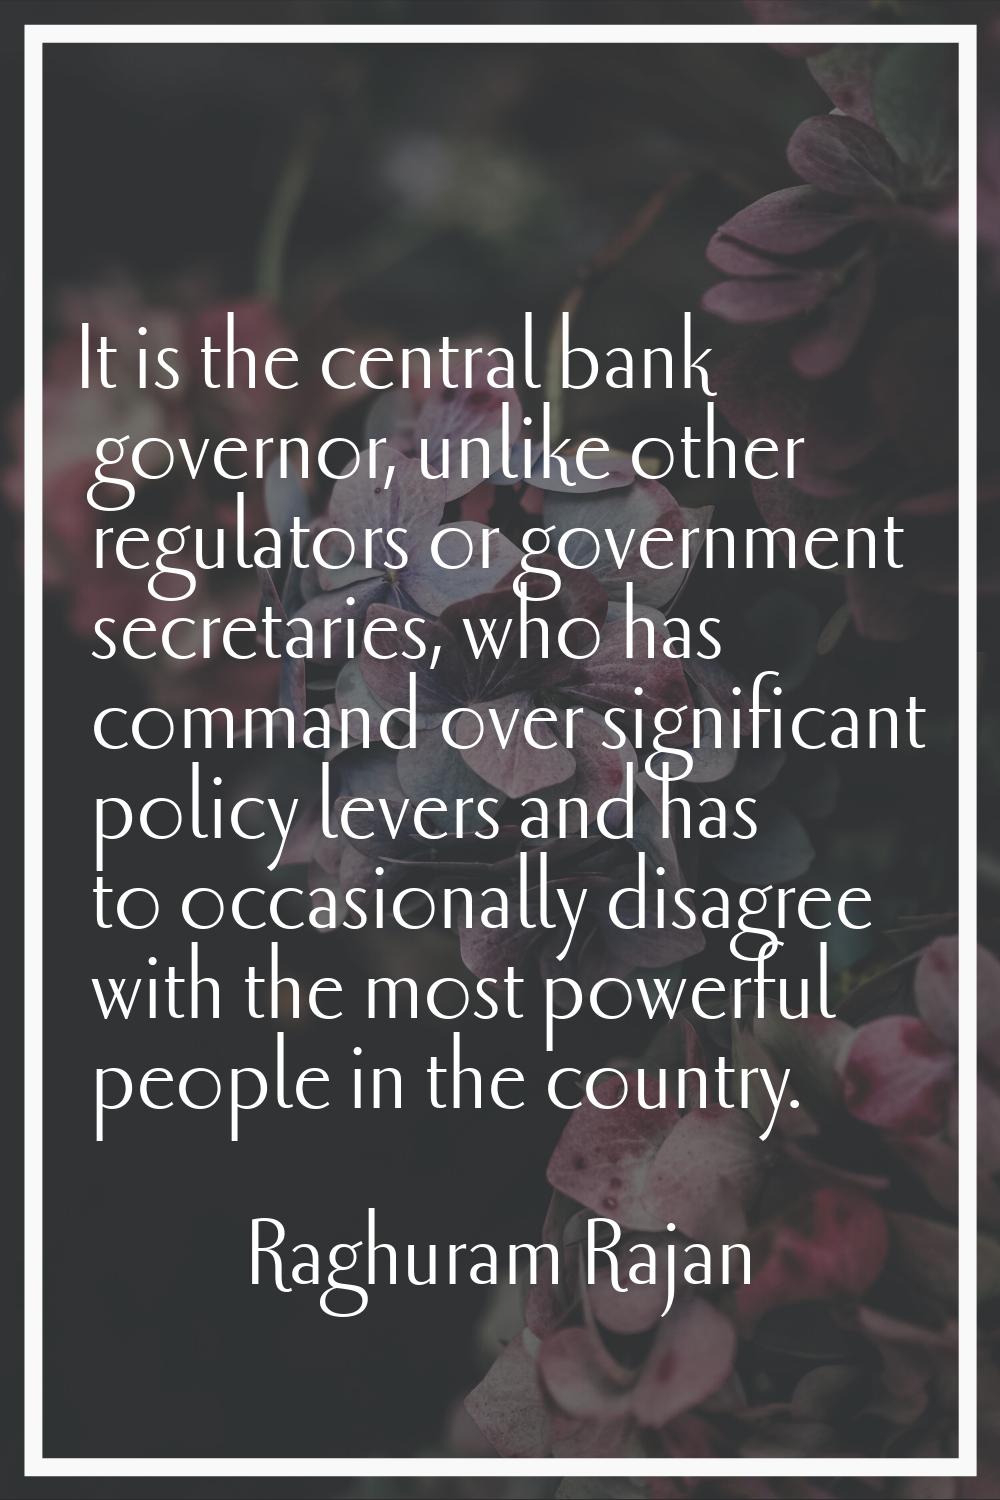 It is the central bank governor, unlike other regulators or government secretaries, who has command